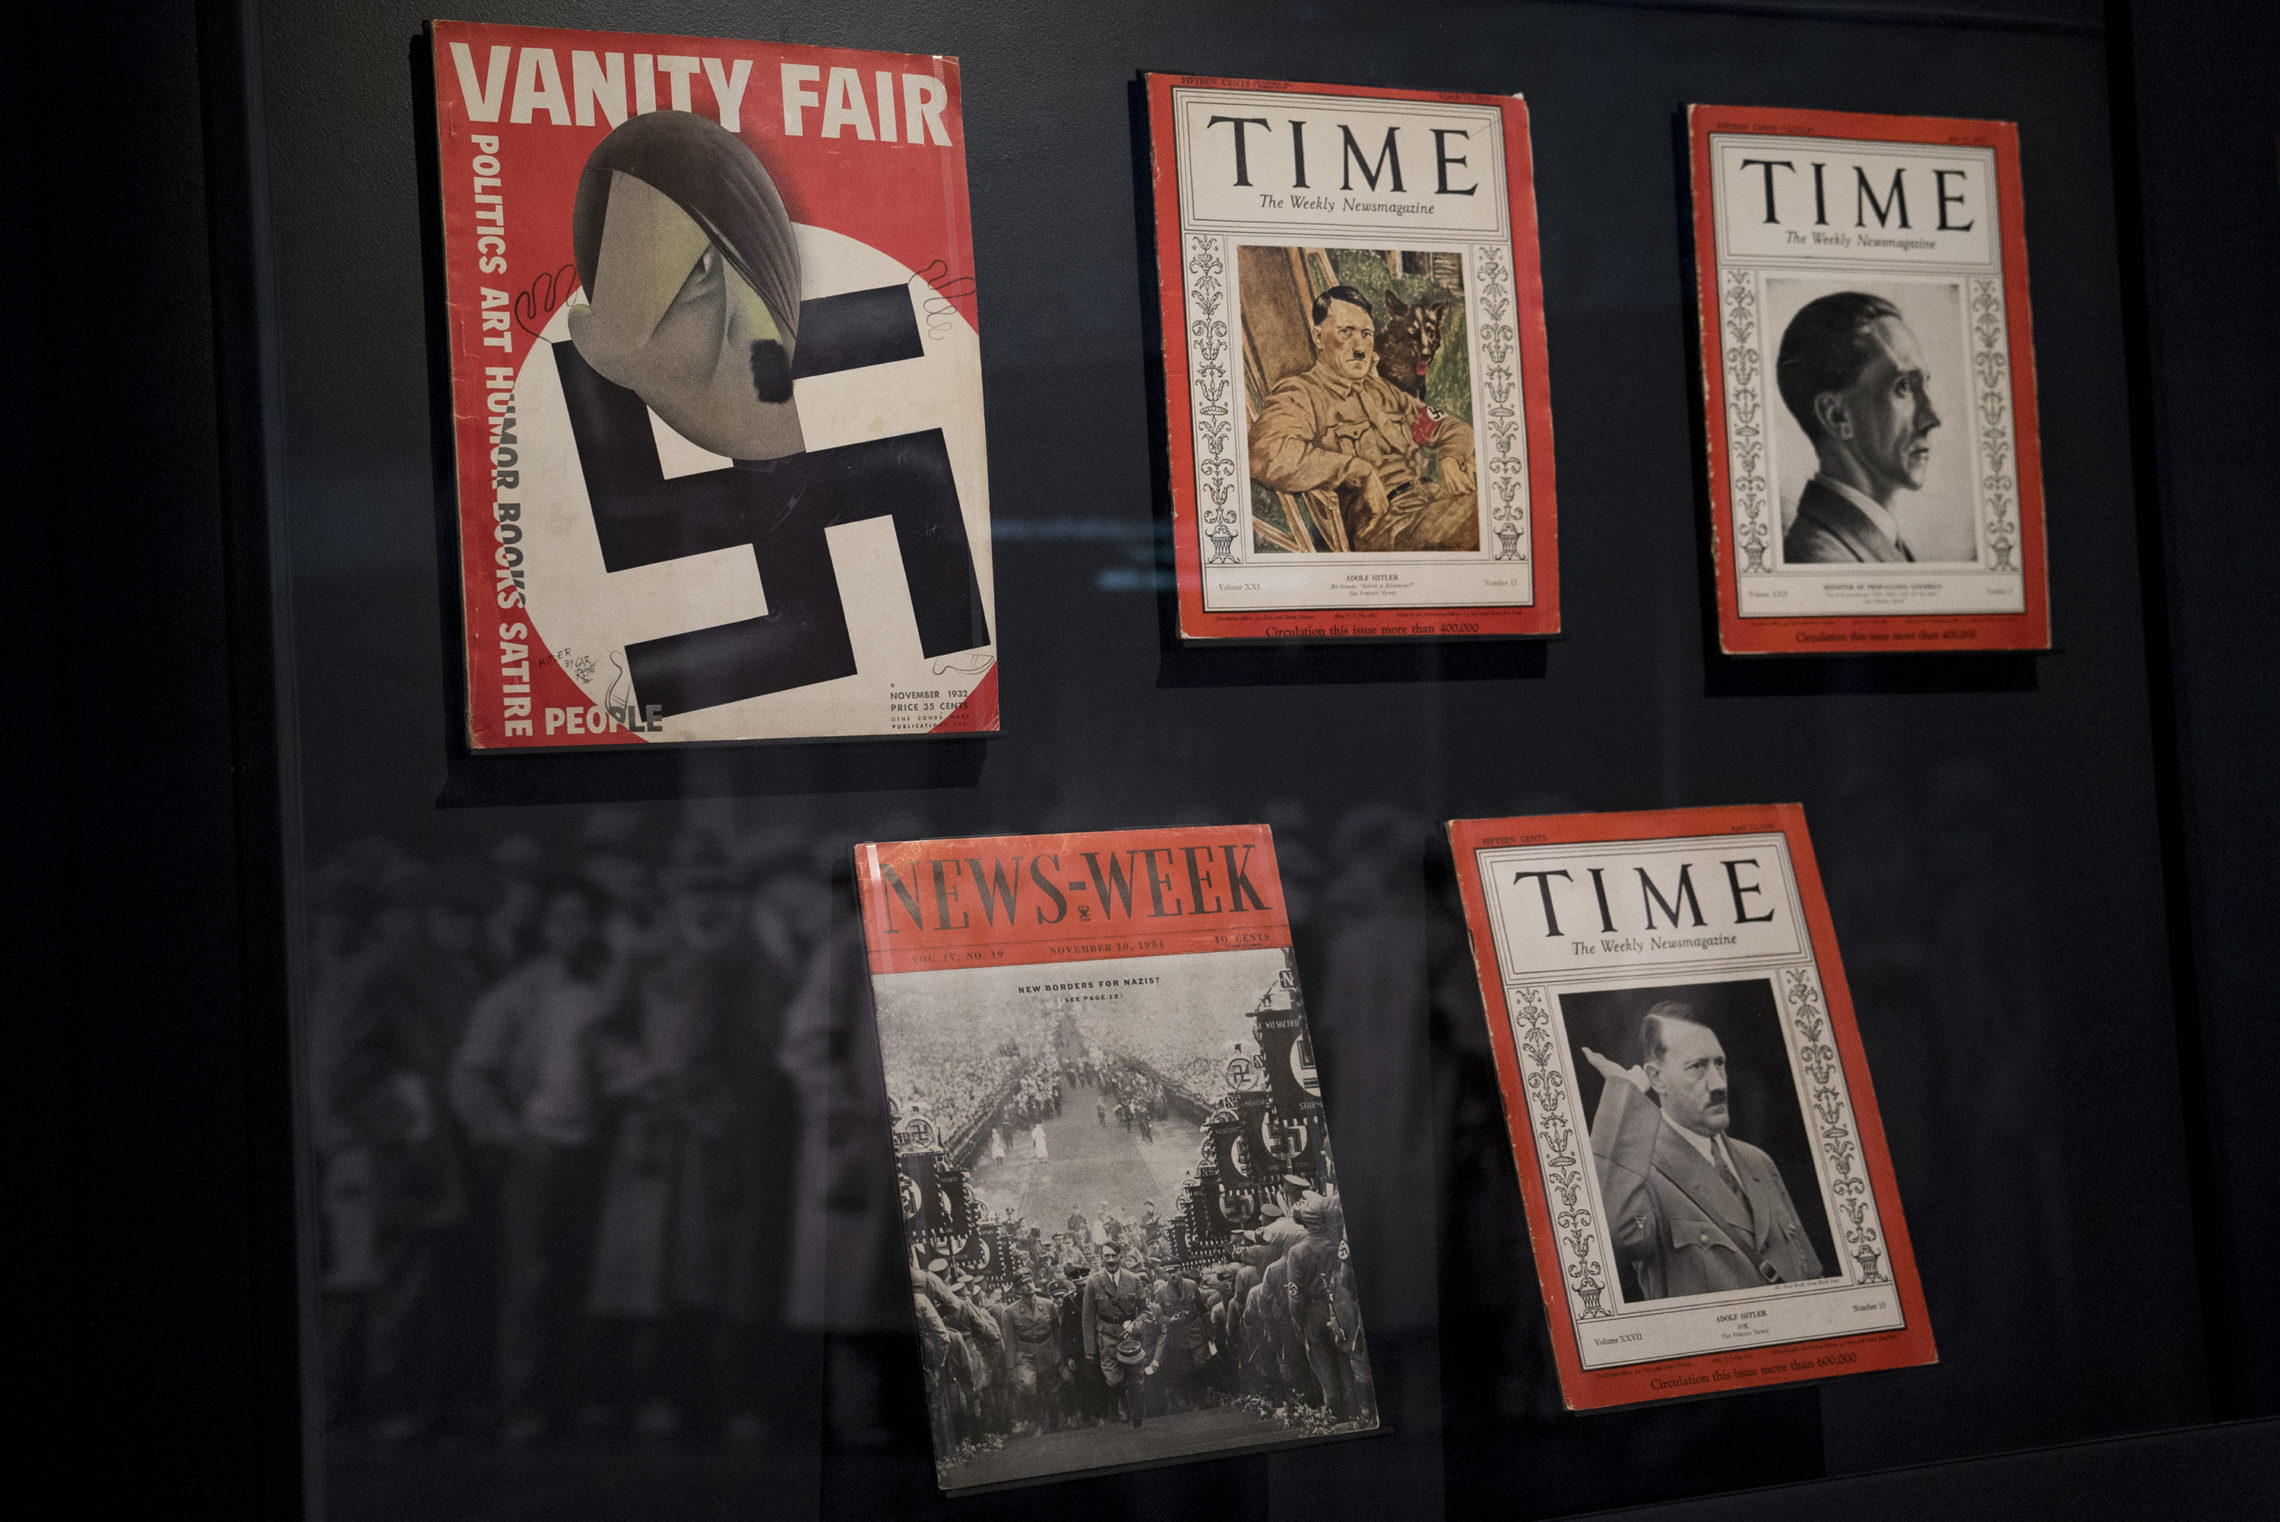 American magazines regularly reported on Hitler and Nazi Germany during the 1930s. CREDIT: ESLAH ATTAR